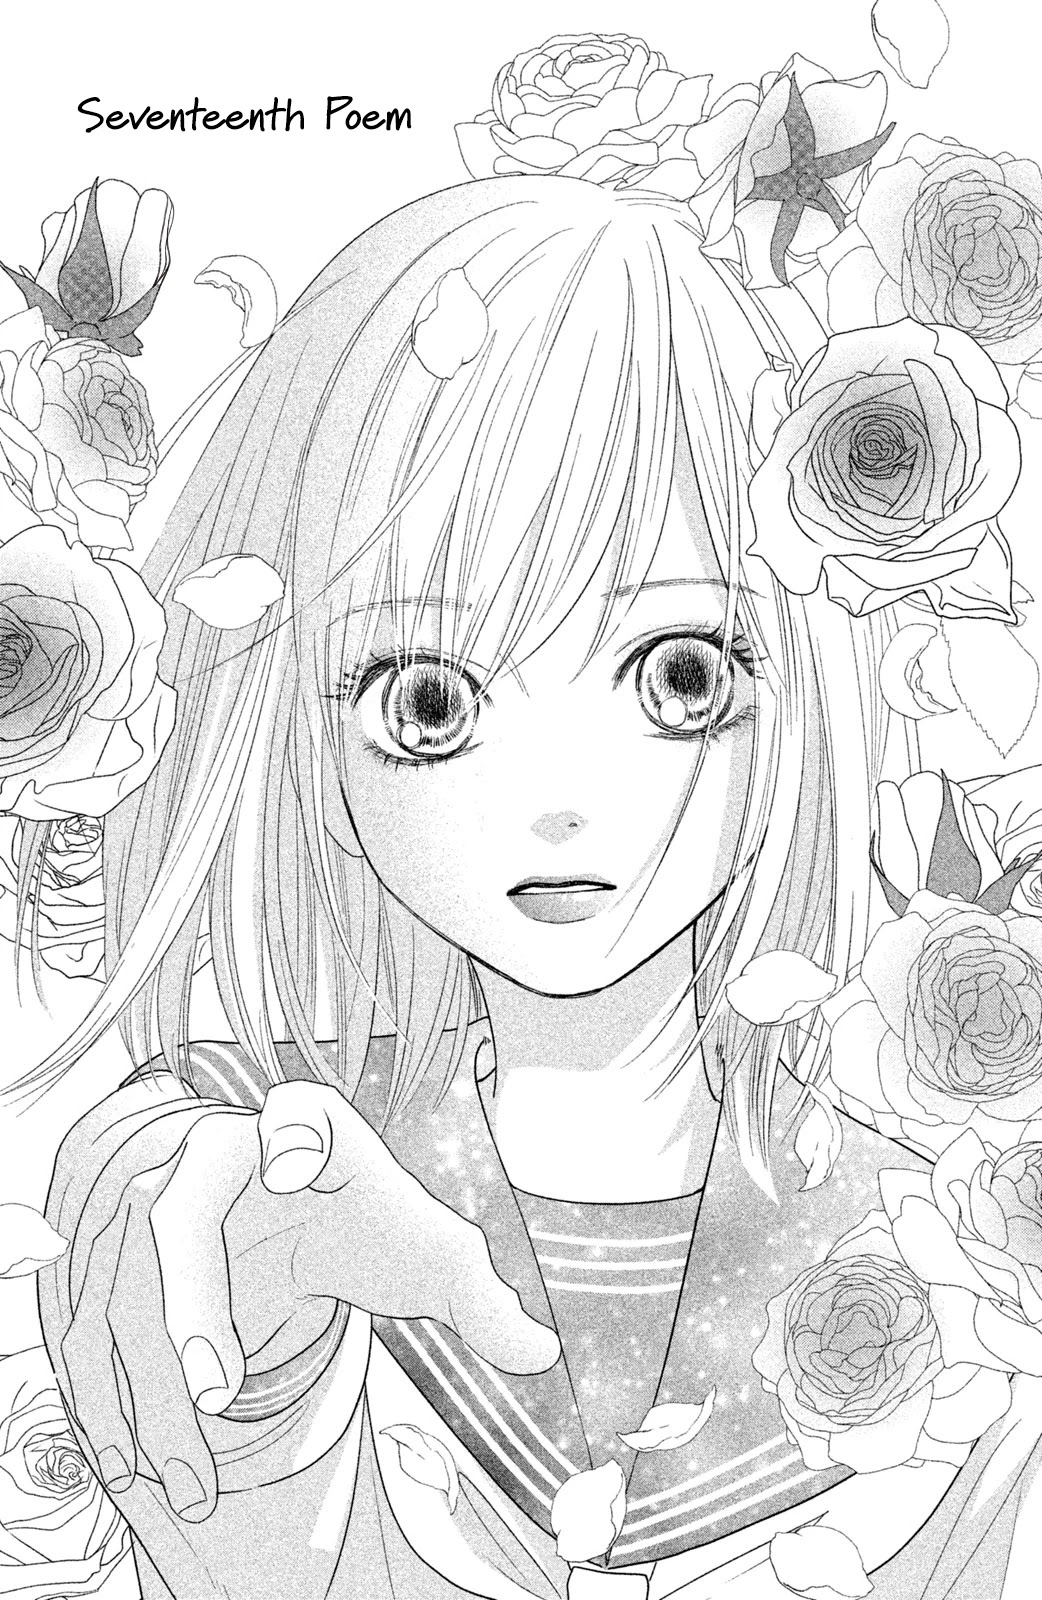 Chihayafuru: Middle School Arc Chapter 17: 17Th Poem - Picture 2